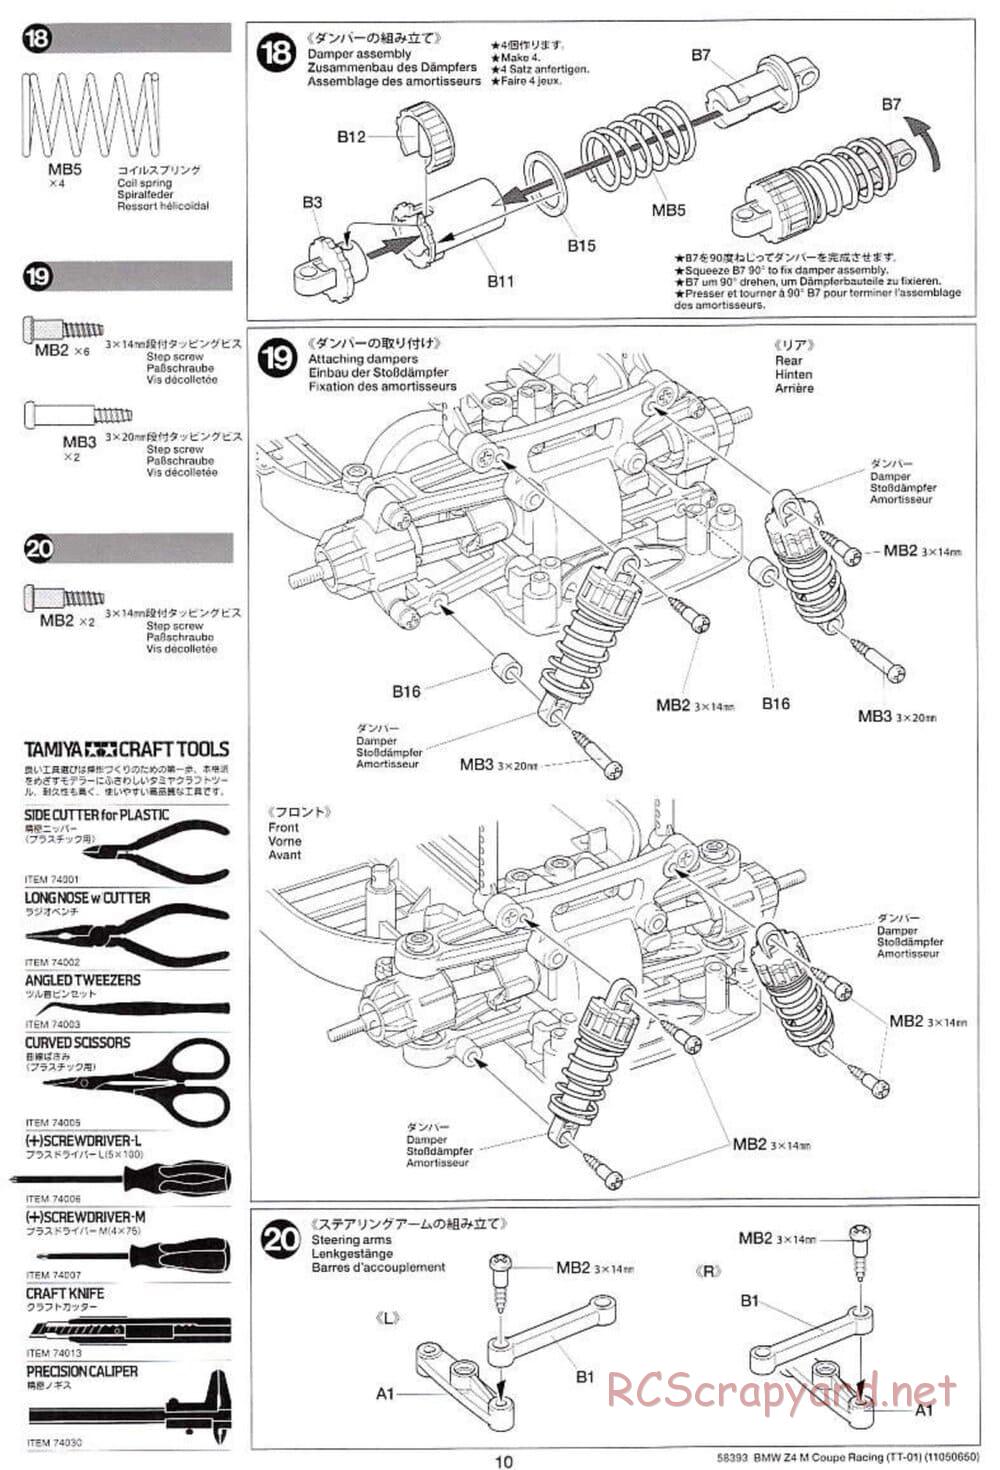 Tamiya - BMW Z4 M Coupe Racing - TT-01 Chassis - Manual - Page 10